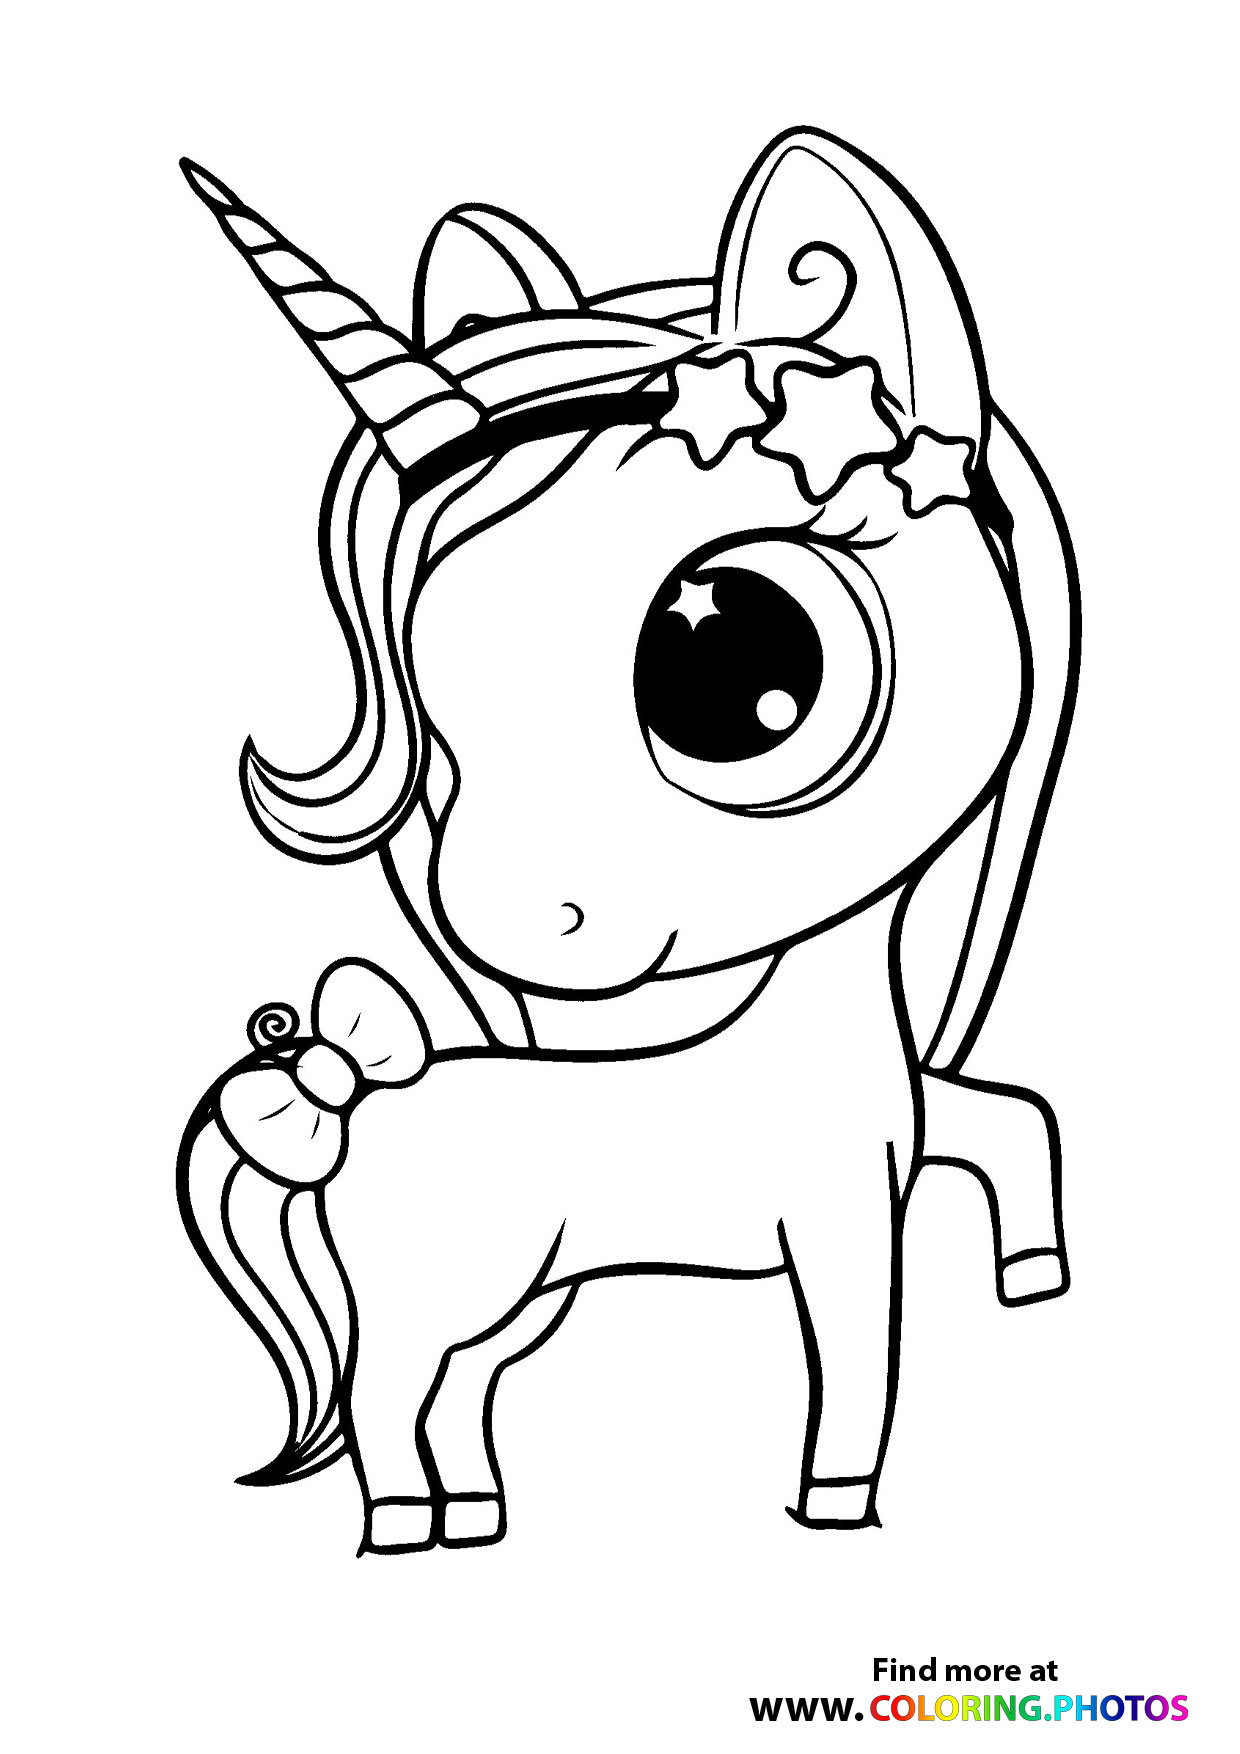 Unicorns   Coloring Pages for kids   Free and easy print or download